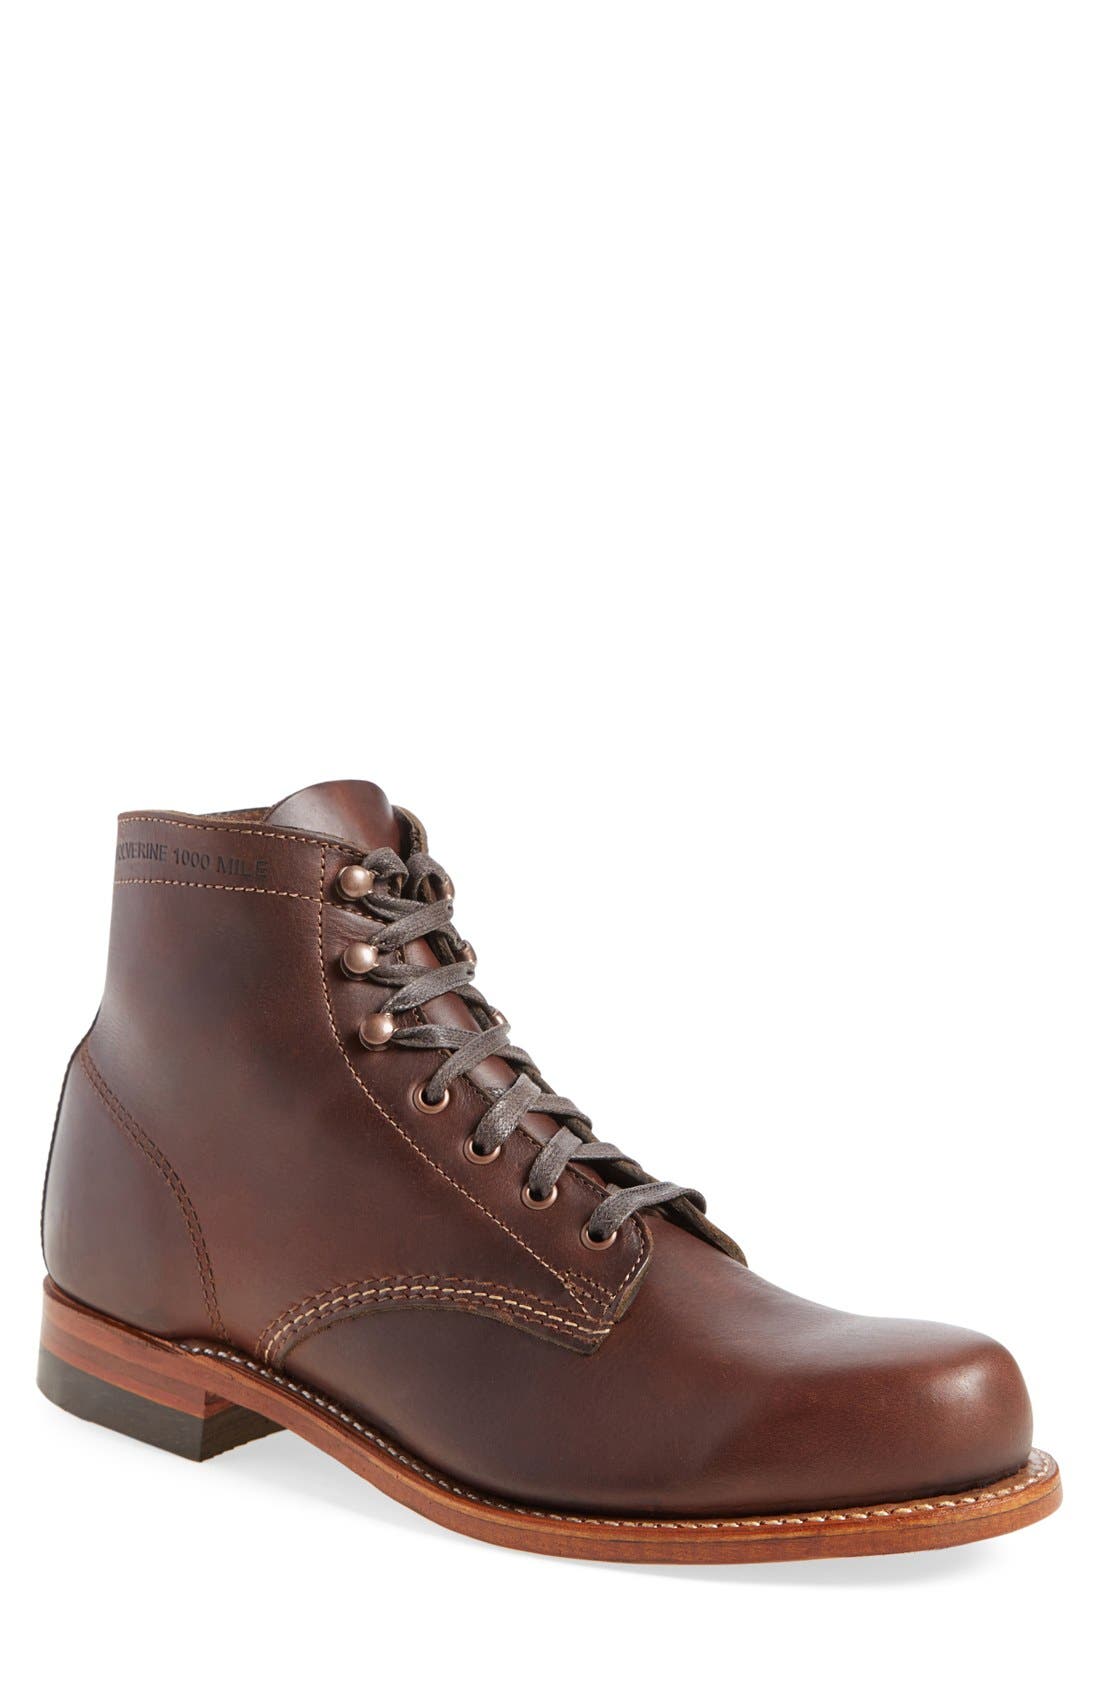 pepe jeans boots mens